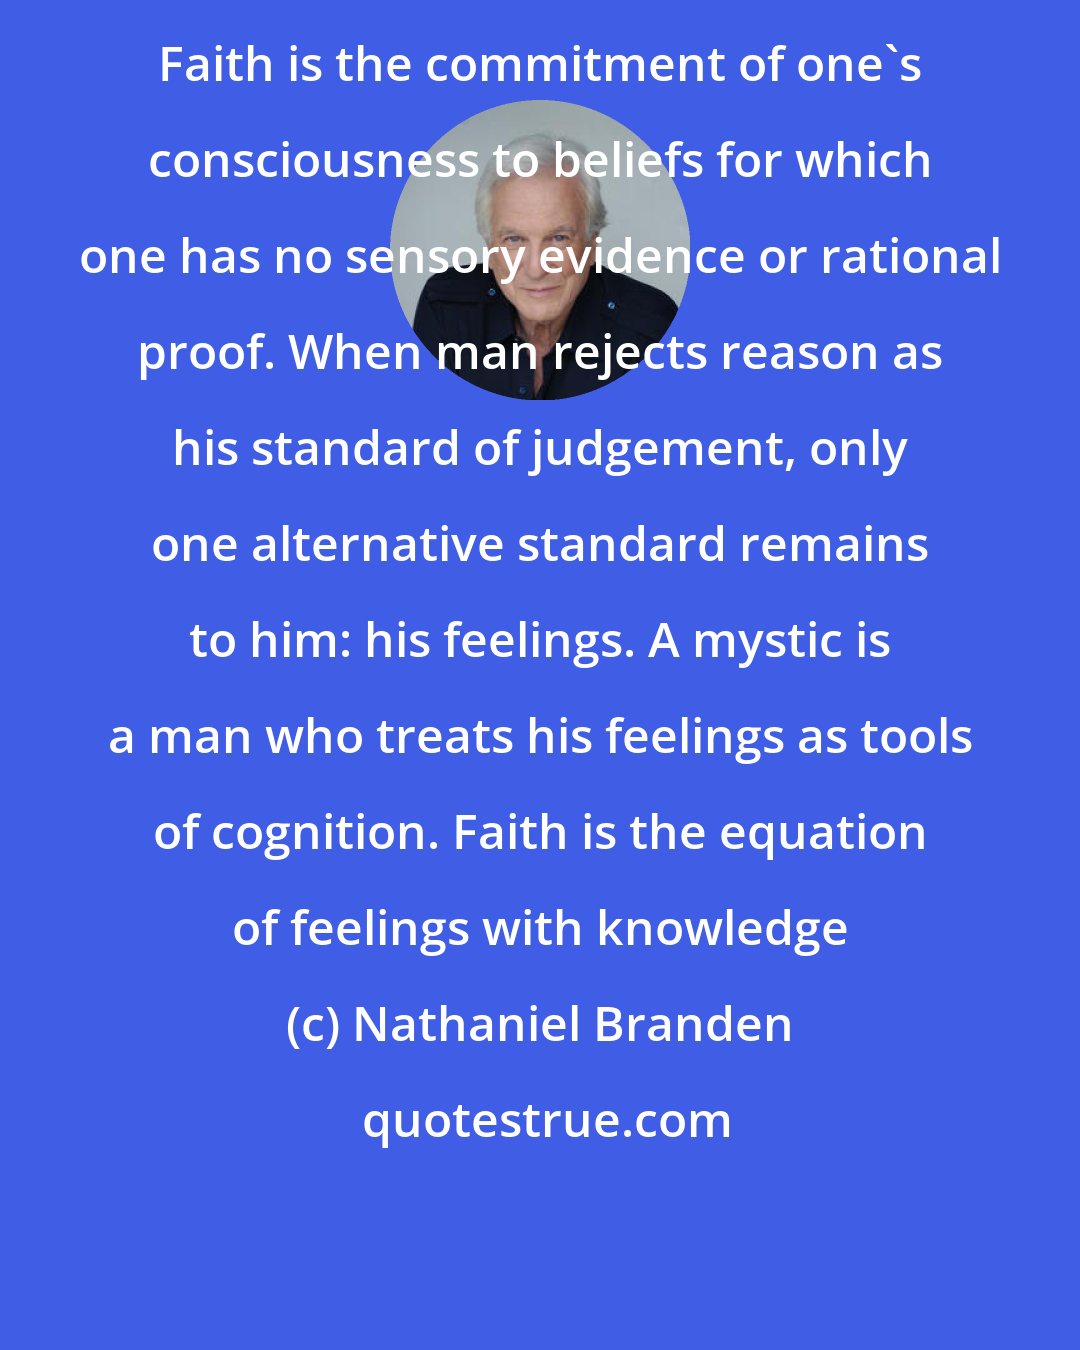 Nathaniel Branden: Faith is the commitment of one's consciousness to beliefs for which one has no sensory evidence or rational proof. When man rejects reason as his standard of judgement, only one alternative standard remains to him: his feelings. A mystic is a man who treats his feelings as tools of cognition. Faith is the equation of feelings with knowledge